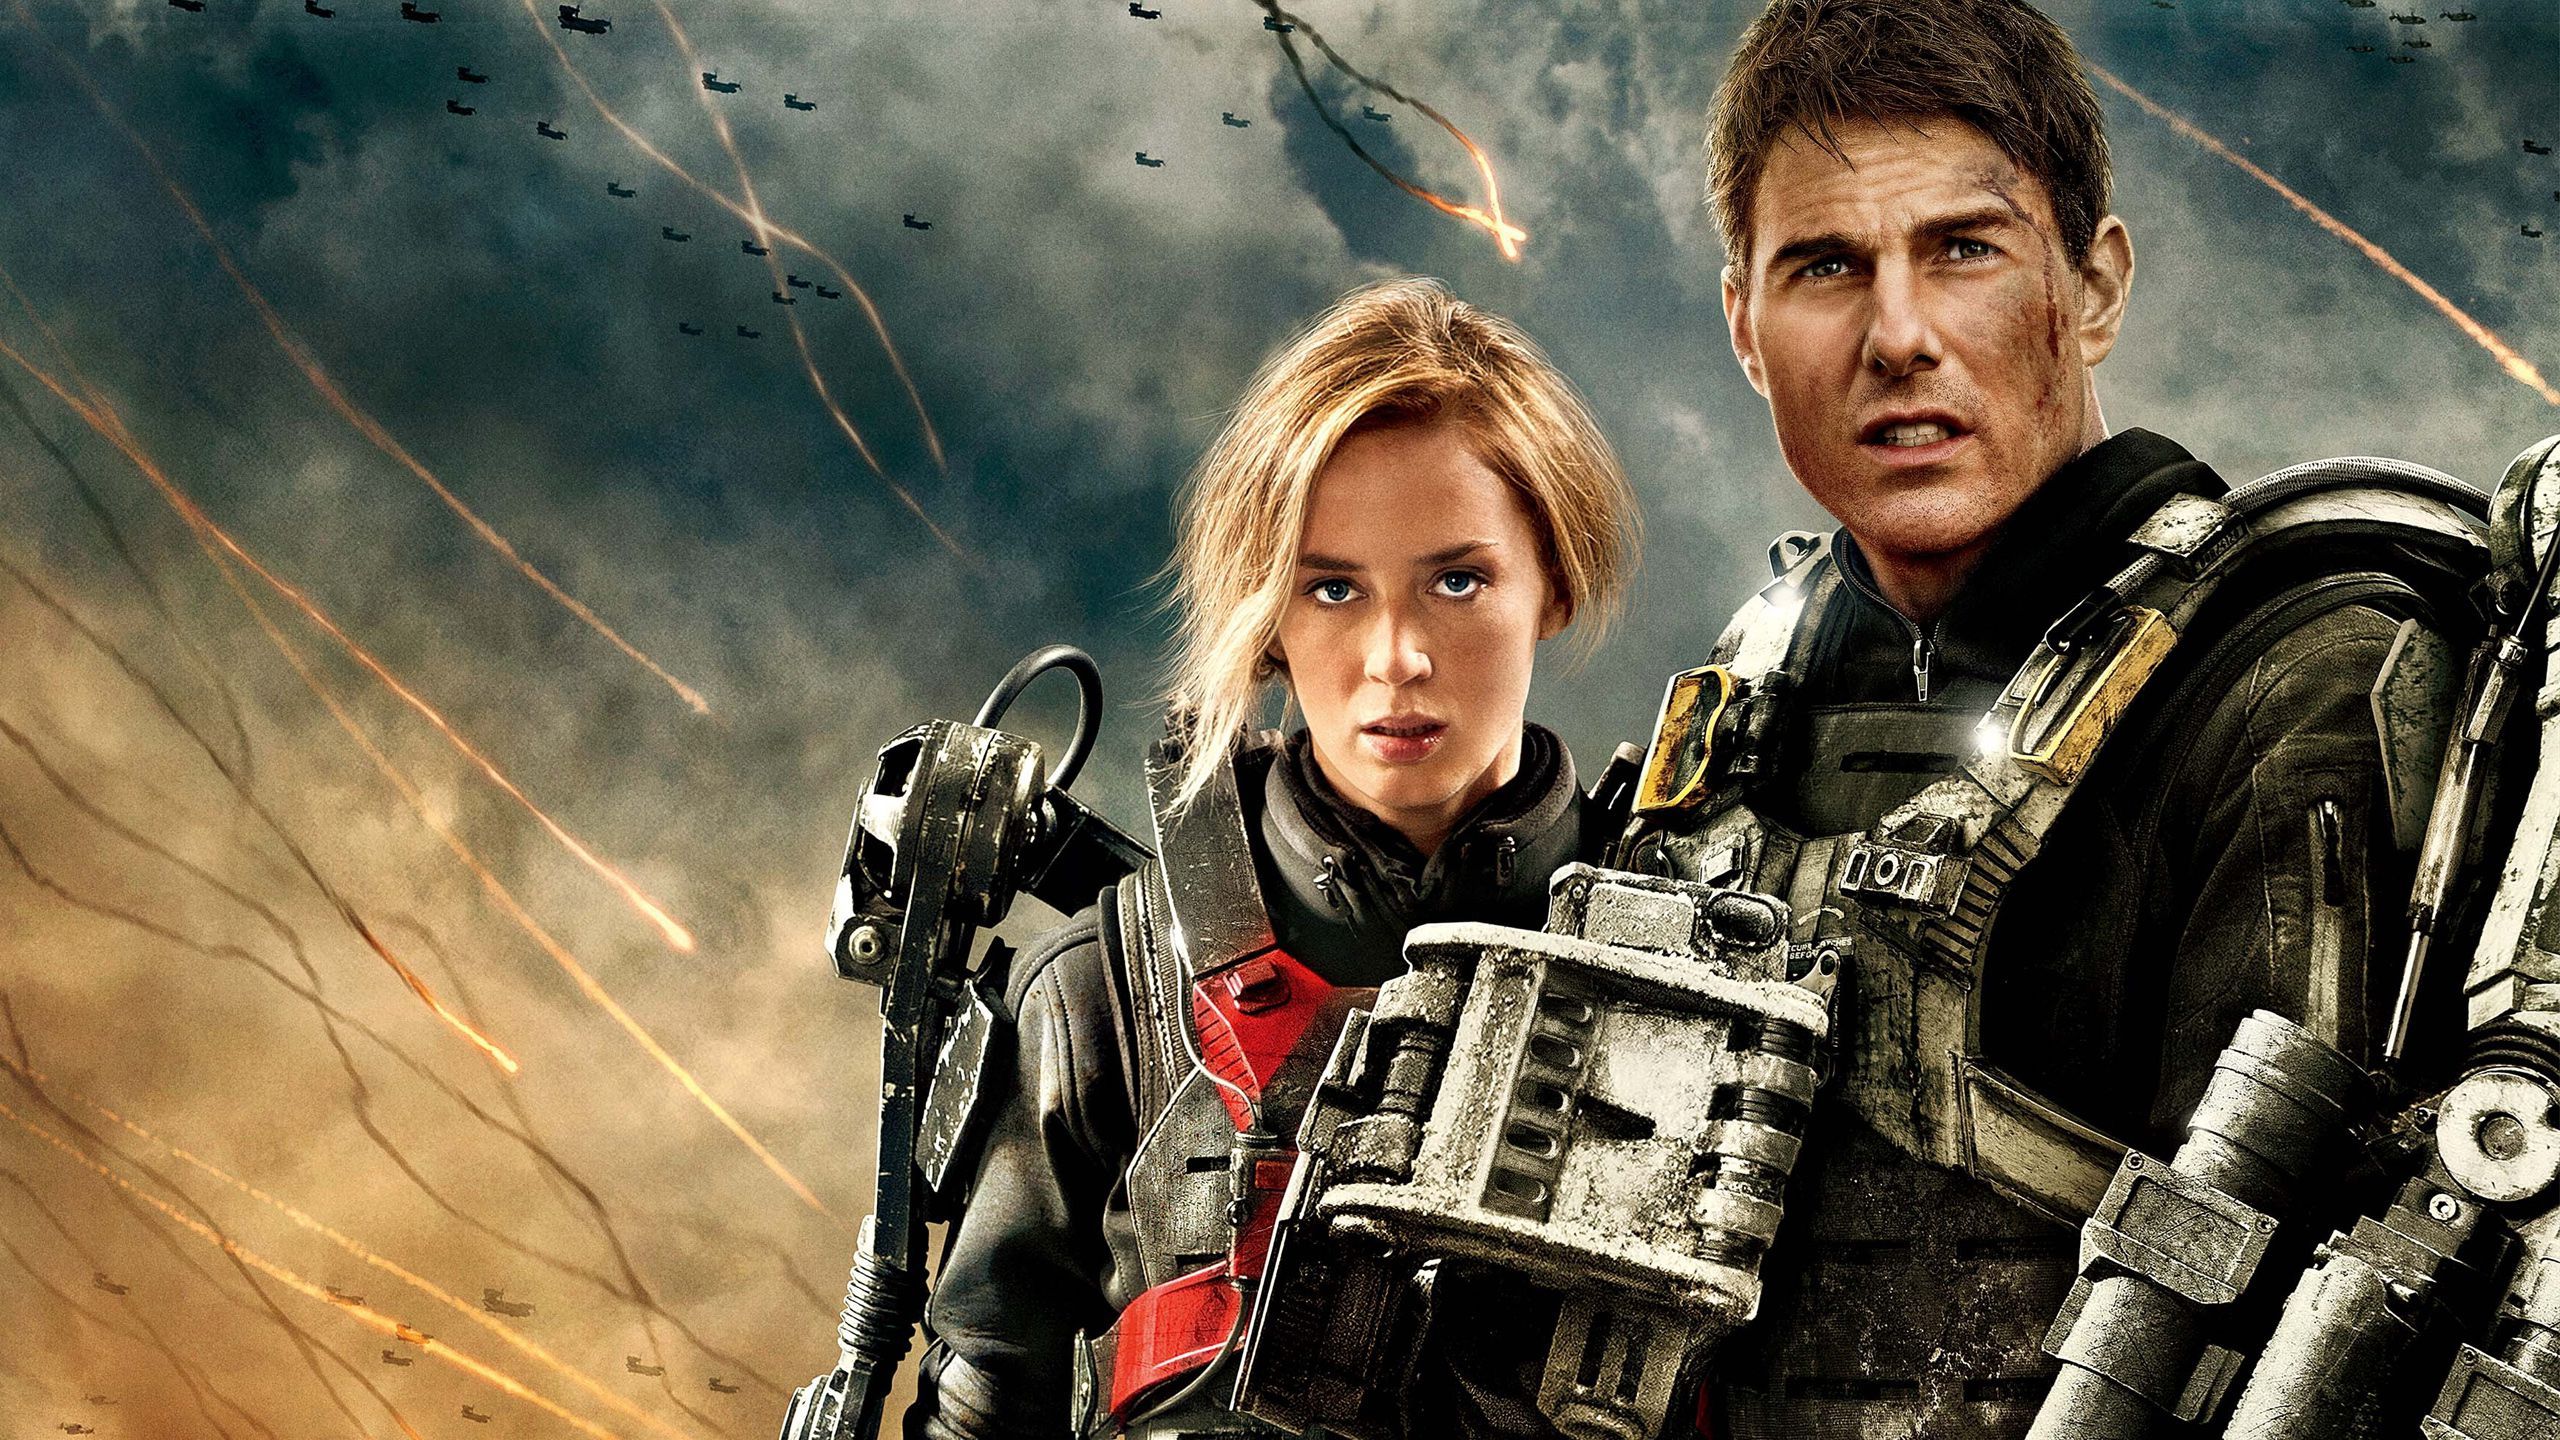 Science Fiction Film Edge Of Tomorrow Image For Wallpaper